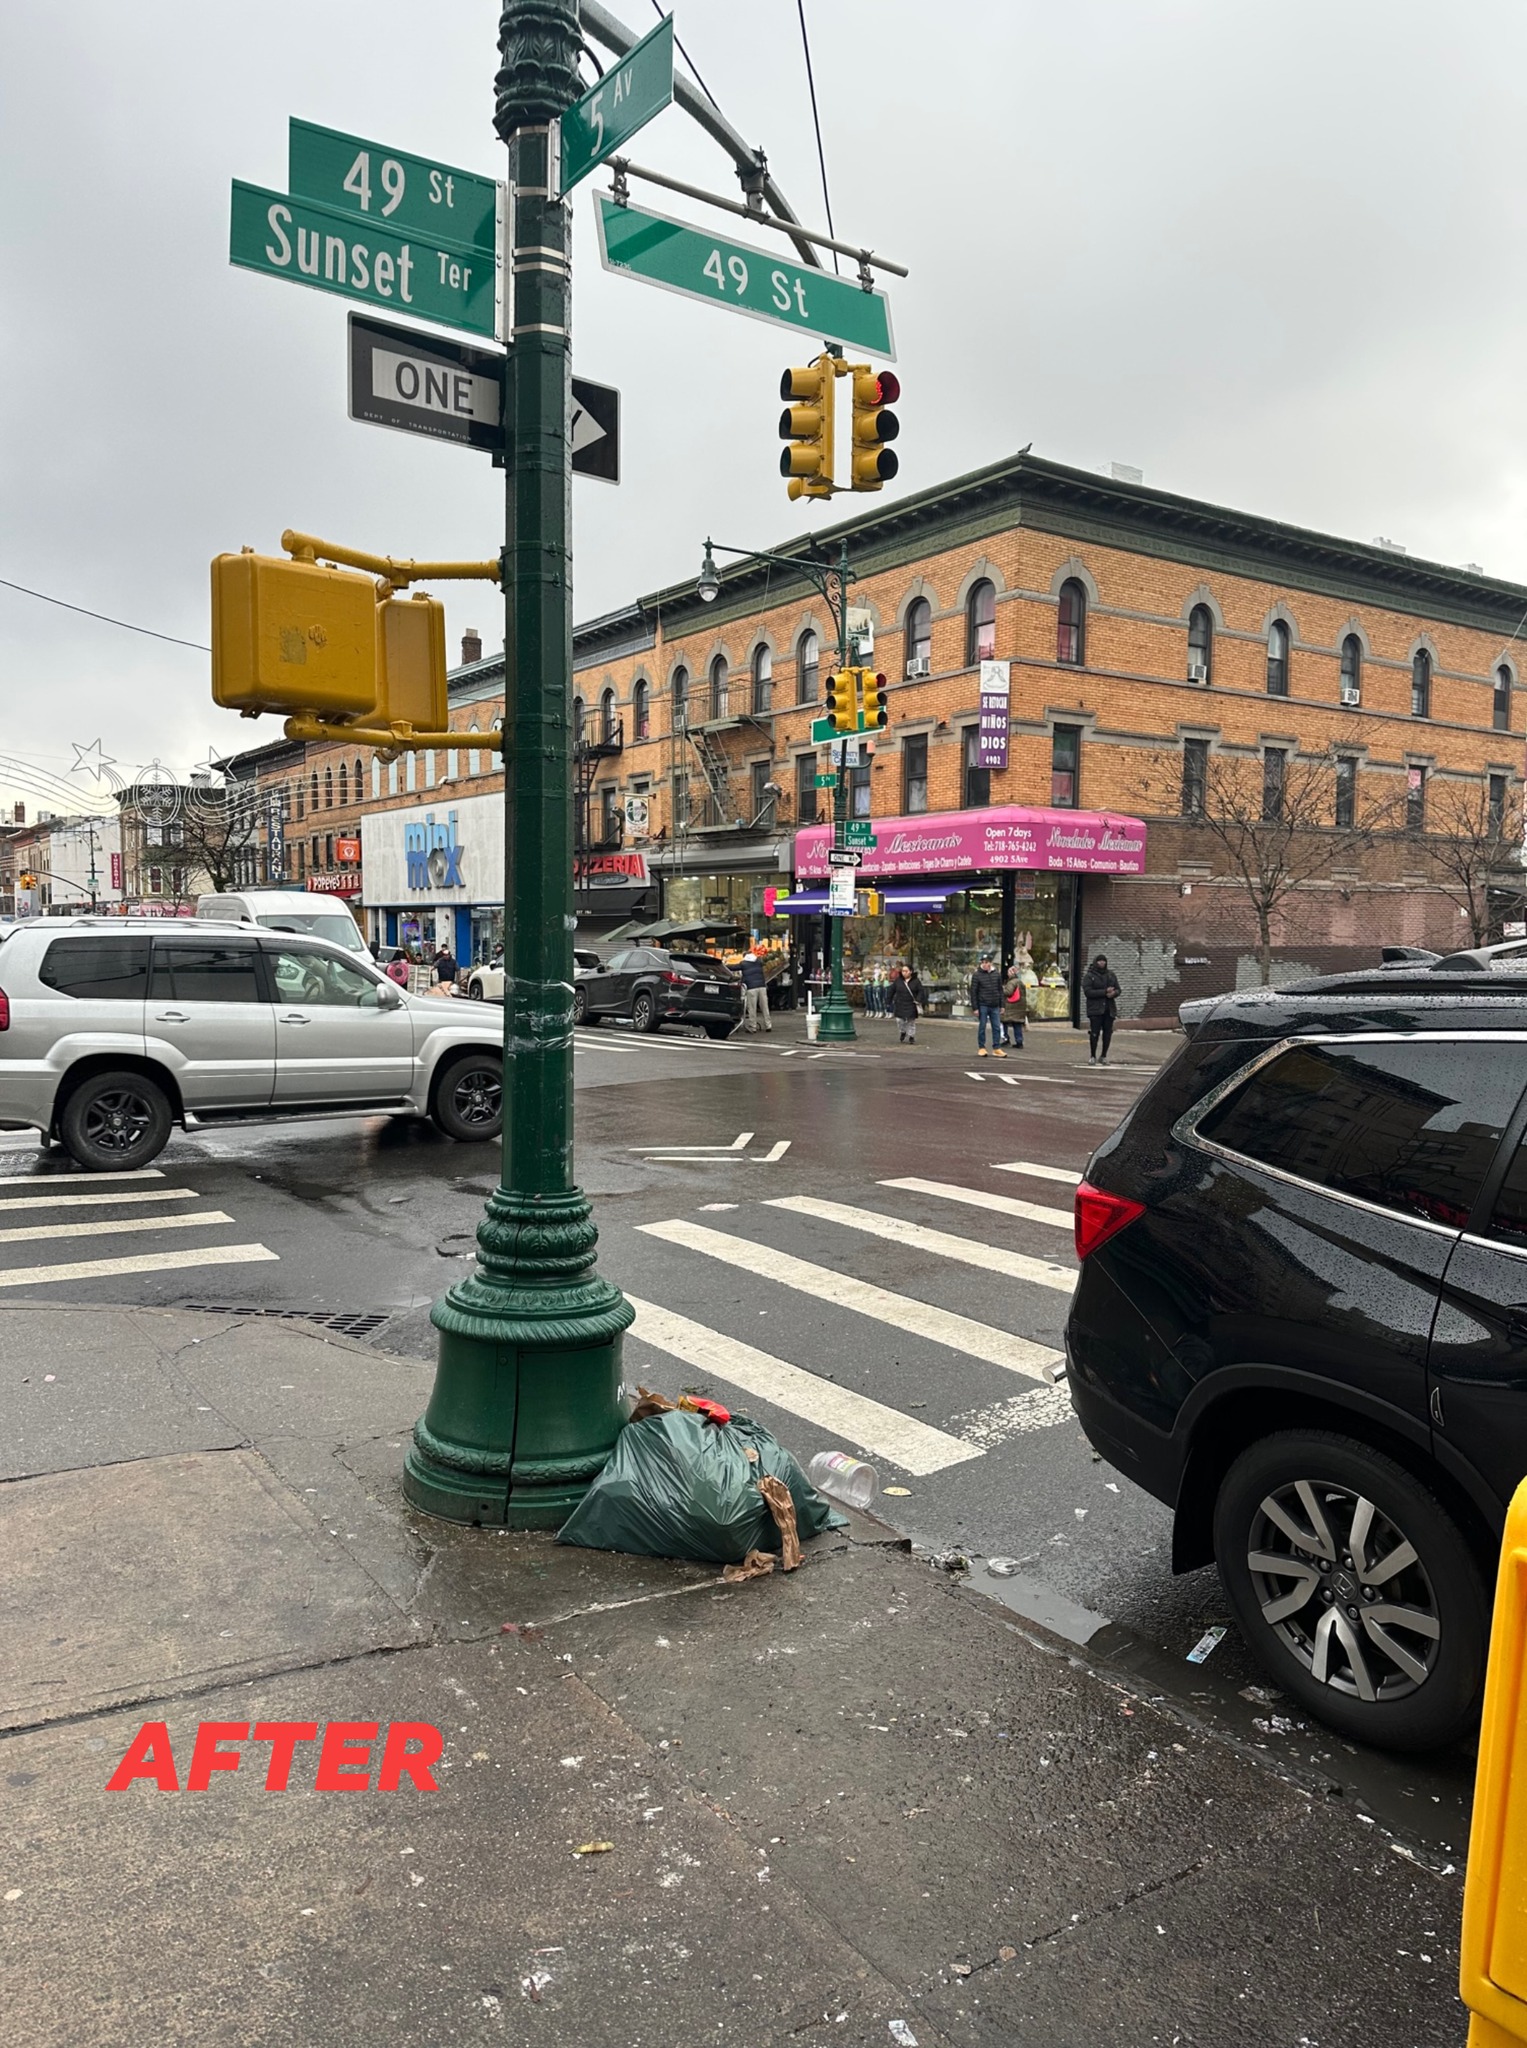 A busy urban intersection with cars and street signs, highlighting a person lying on the ground near a green post, with "after" text superimposed at the bottom.